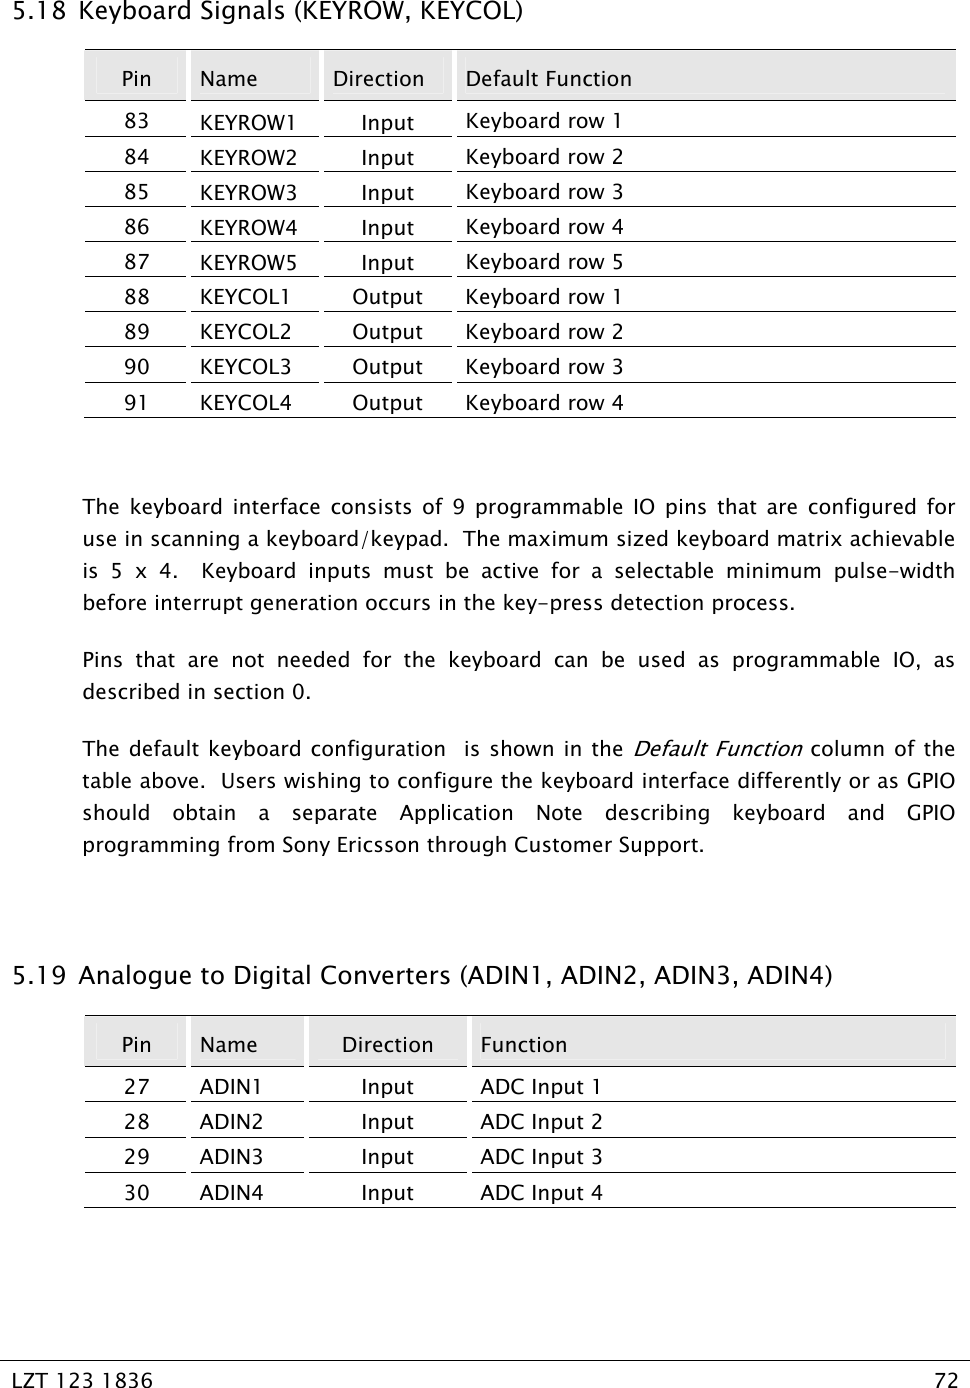   LZT 123 1836  72   5.18  Keyboard Signals (KEYROW, KEYCOL) Pin  Name  Direction  Default Function 83  KEYROW1 Input Keyboard row 1 84  KEYROW2 Input Keyboard row 2  85  KEYROW3 Input Keyboard row 3 86  KEYROW4 Input Keyboard row 4 87  KEYROW5 Input Keyboard row 5 88  KEYCOL1  Output  Keyboard row 1 89  KEYCOL2  Output  Keyboard row 2 90  KEYCOL3  Output  Keyboard row 3 91  KEYCOL4  Output  Keyboard row 4  The keyboard interface consists of 9 programmable IO pins that are configured for use in scanning a keyboard/keypad.  The maximum sized keyboard matrix achievable is 5 x 4.  Keyboard inputs must be active for a selectable minimum pulse-width before interrupt generation occurs in the key-press detection process. Pins that are not needed for the keyboard can be used as programmable IO, as described in section 0. The default keyboard configuration  is shown in the Default Function column of the table above.  Users wishing to configure the keyboard interface differently or as GPIO should obtain a separate Application Note describing keyboard and GPIO programming from Sony Ericsson through Customer Support.     5.19  Analogue to Digital Converters (ADIN1, ADIN2, ADIN3, ADIN4) Pin  Name  Direction  Function 27 ADIN1  Input  ADC Input 1 28 ADIN2  Input  ADC Input 2 29 ADIN3  Input  ADC Input 3 30 ADIN4  Input  ADC Input 4  